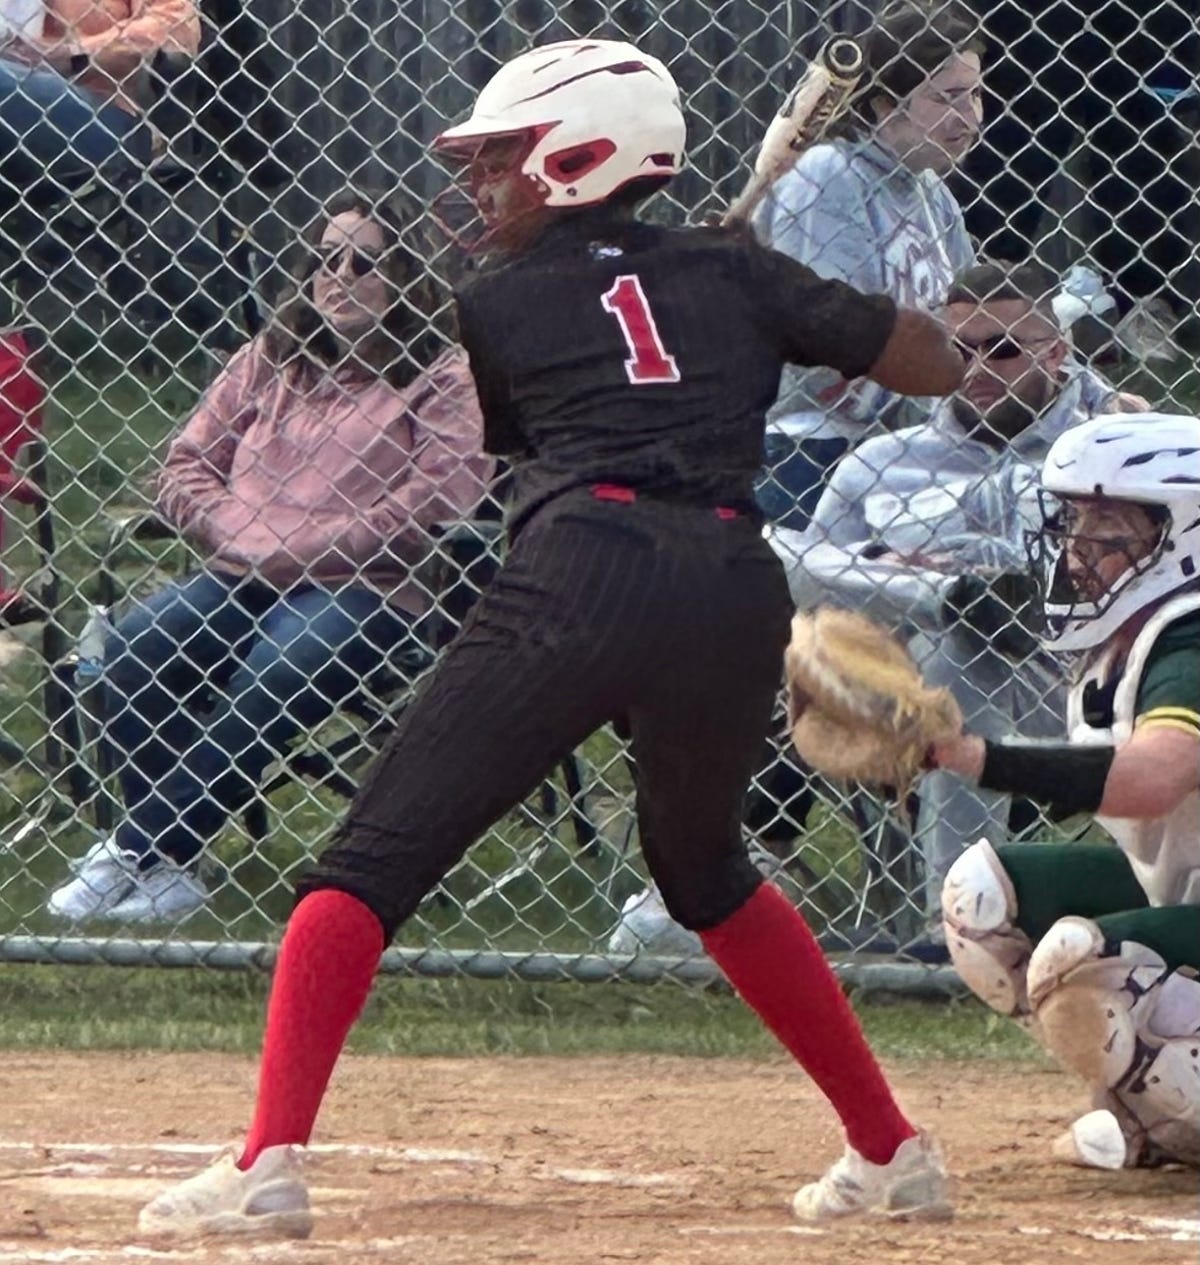 Latest Delaware Online Athlete of the Week vote goes to William Penn softball standout